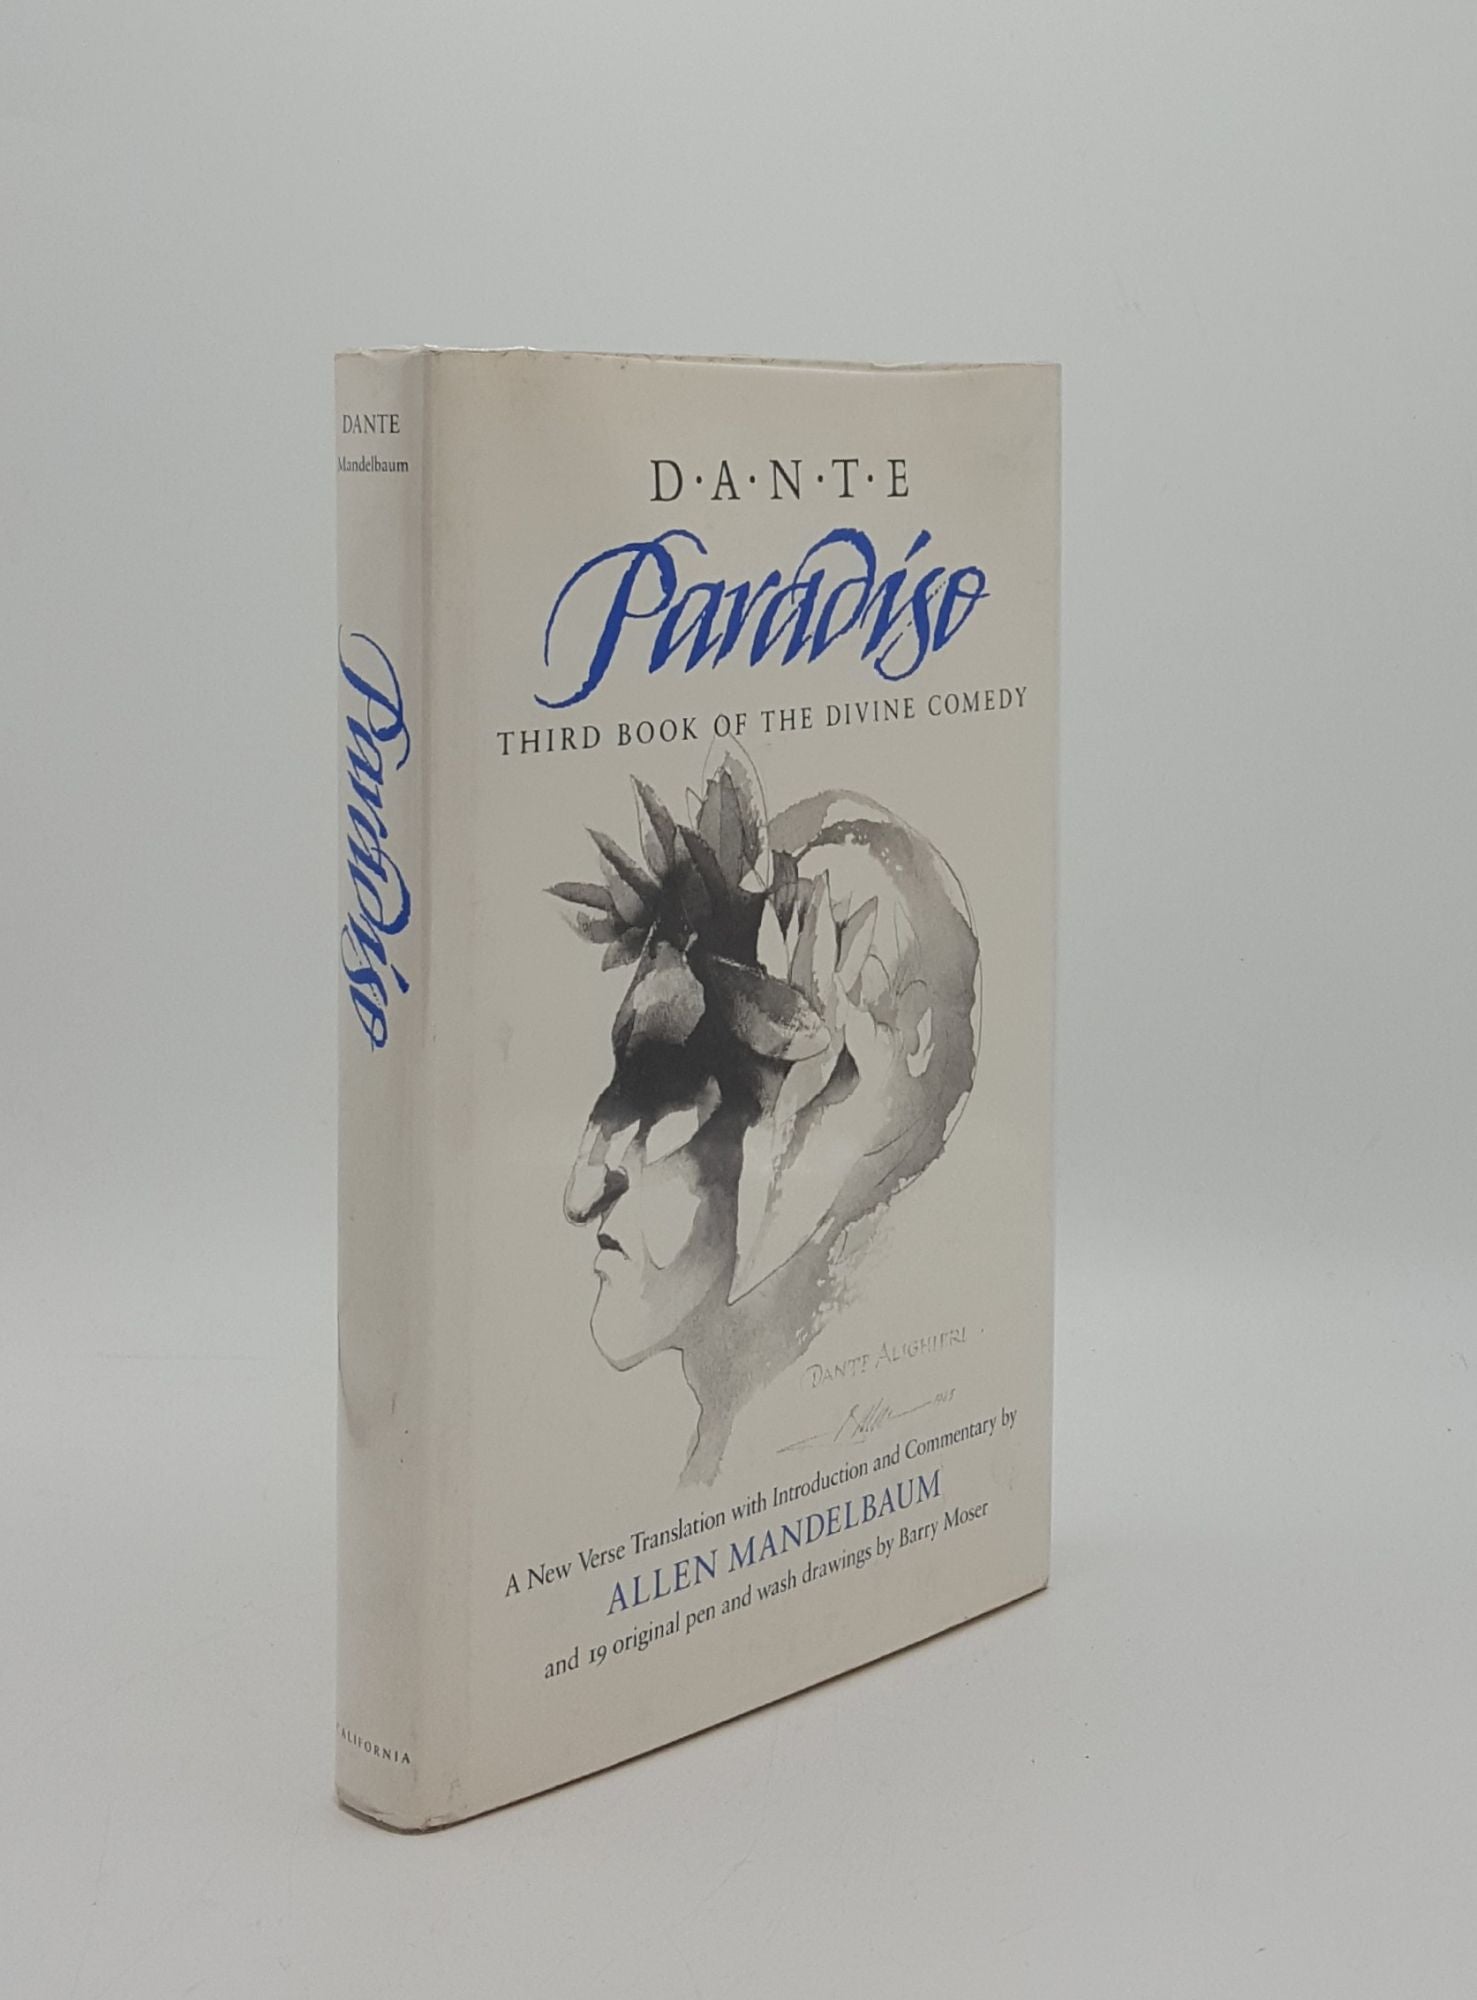 DANTE ALIGHIERI, MANDELBAUM Allen - Paradiso the Second Book of the Divine Comedy of Dante Alighieri a Verse Translation with Introduction and Commentary